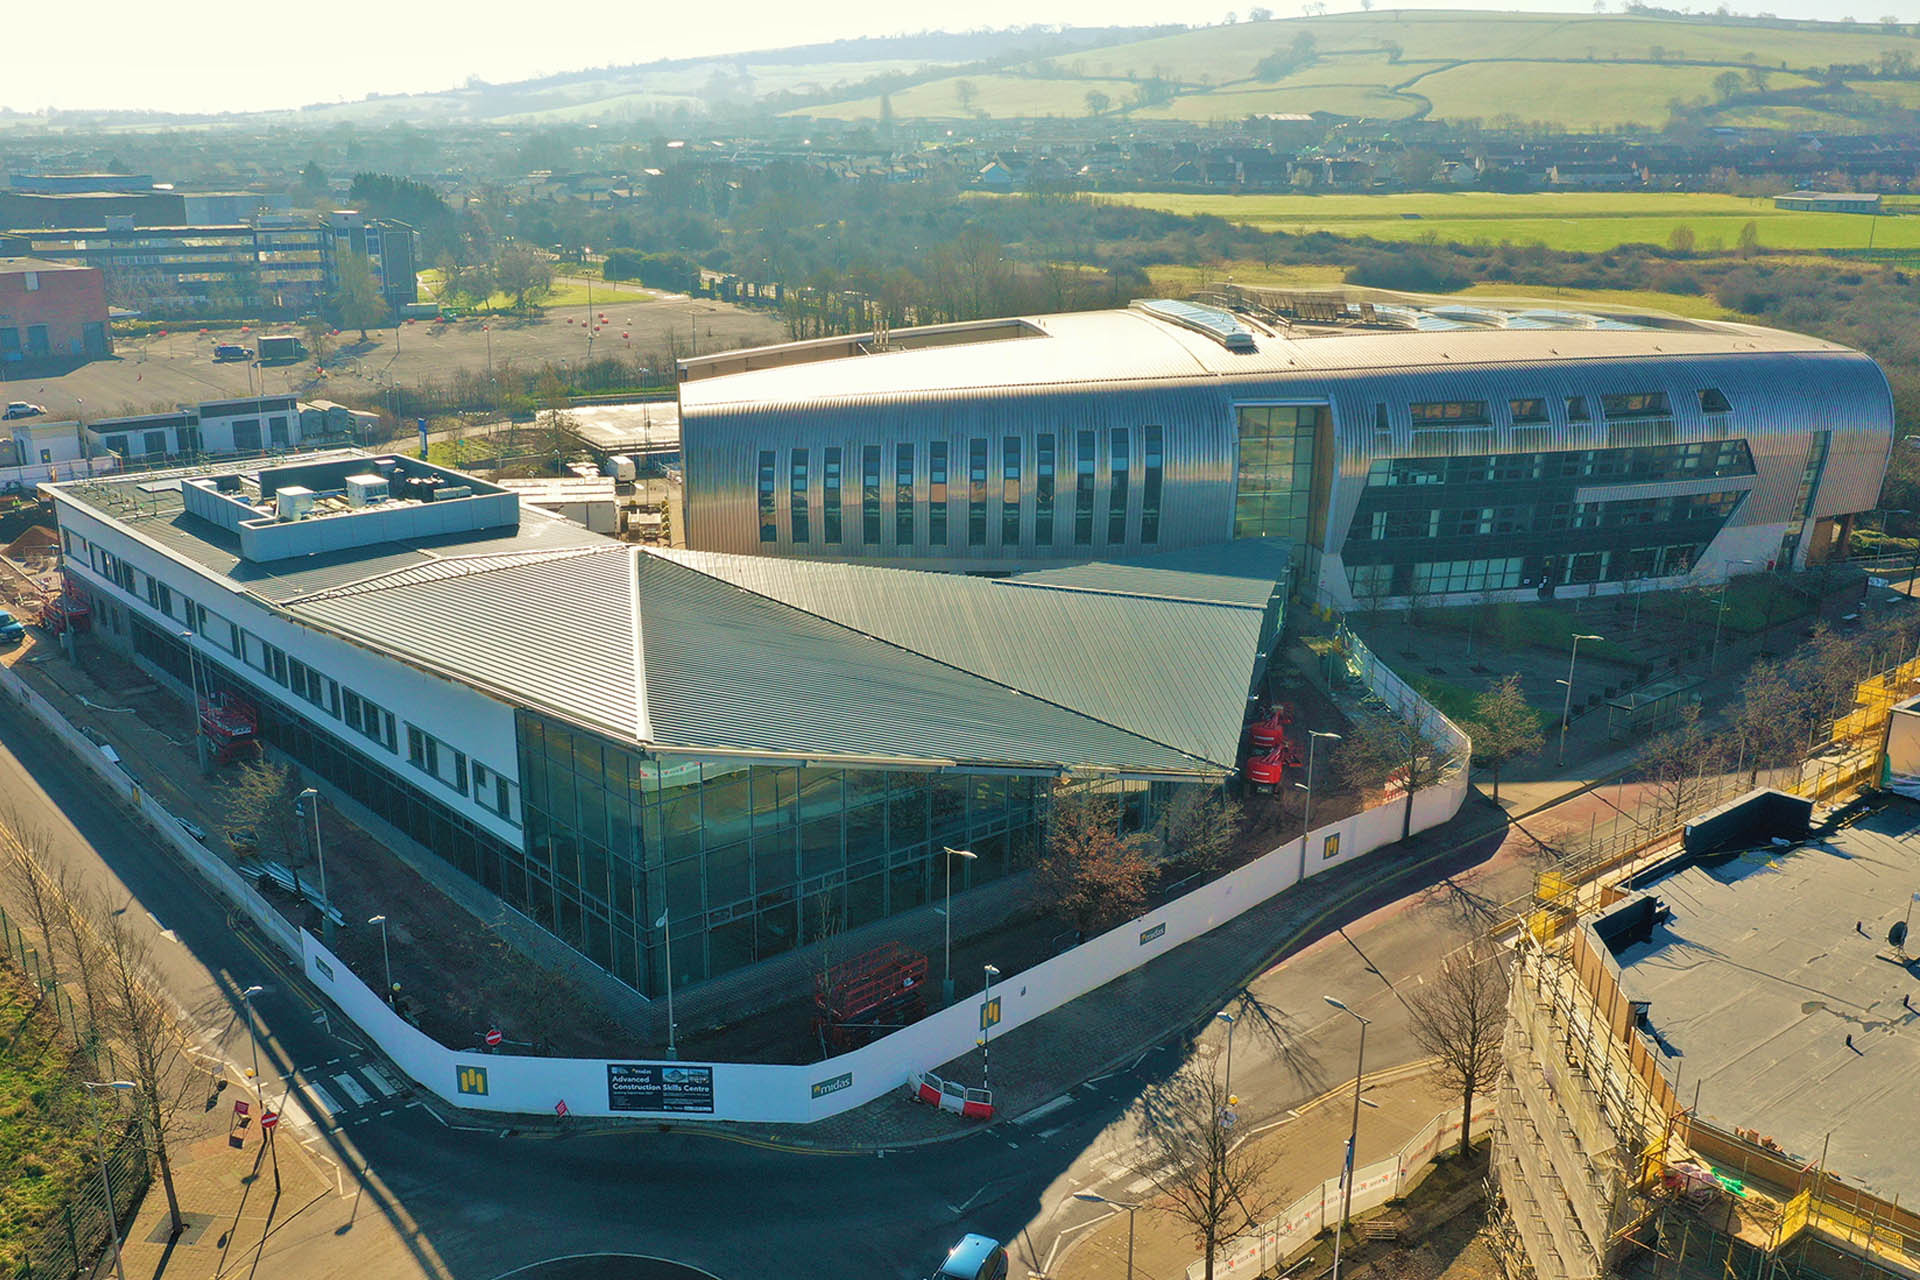 Arial view of Advanced Construction Skills Centre